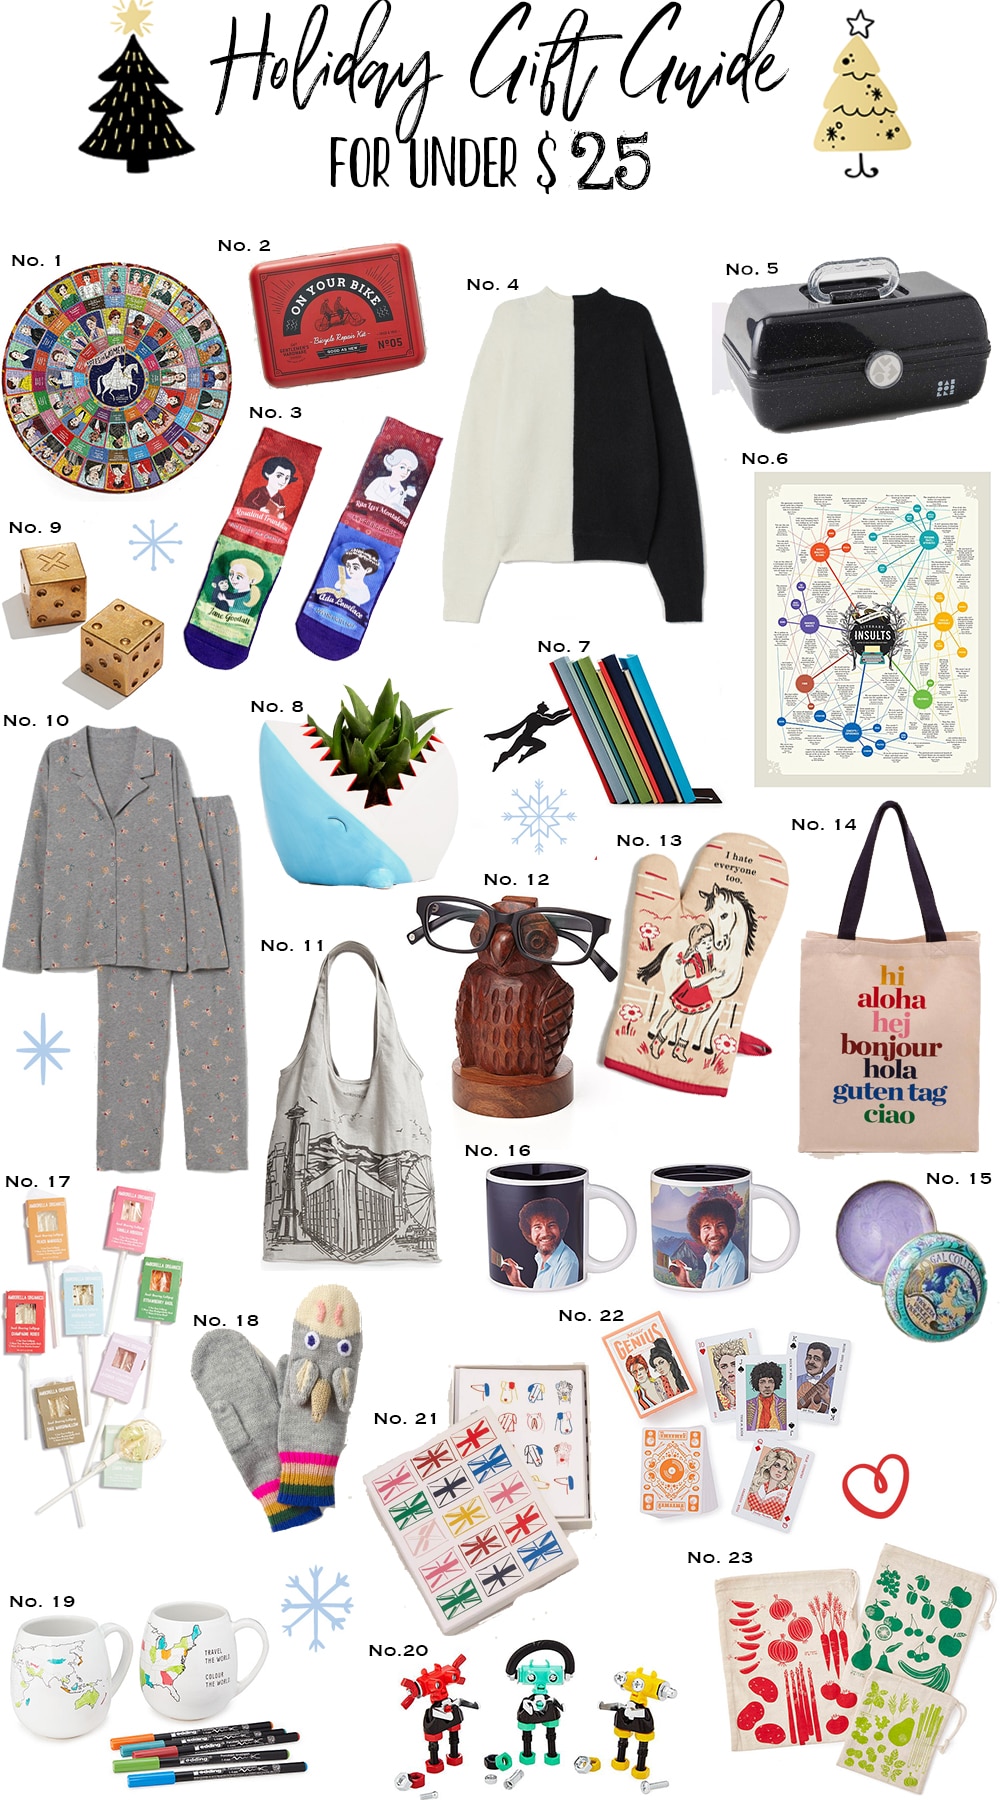 This is a holiday gift guide for under $25 gift ideas | gift ideas | christmas inspiration | holiday gift guide | christmas gift ideas | livelovesara